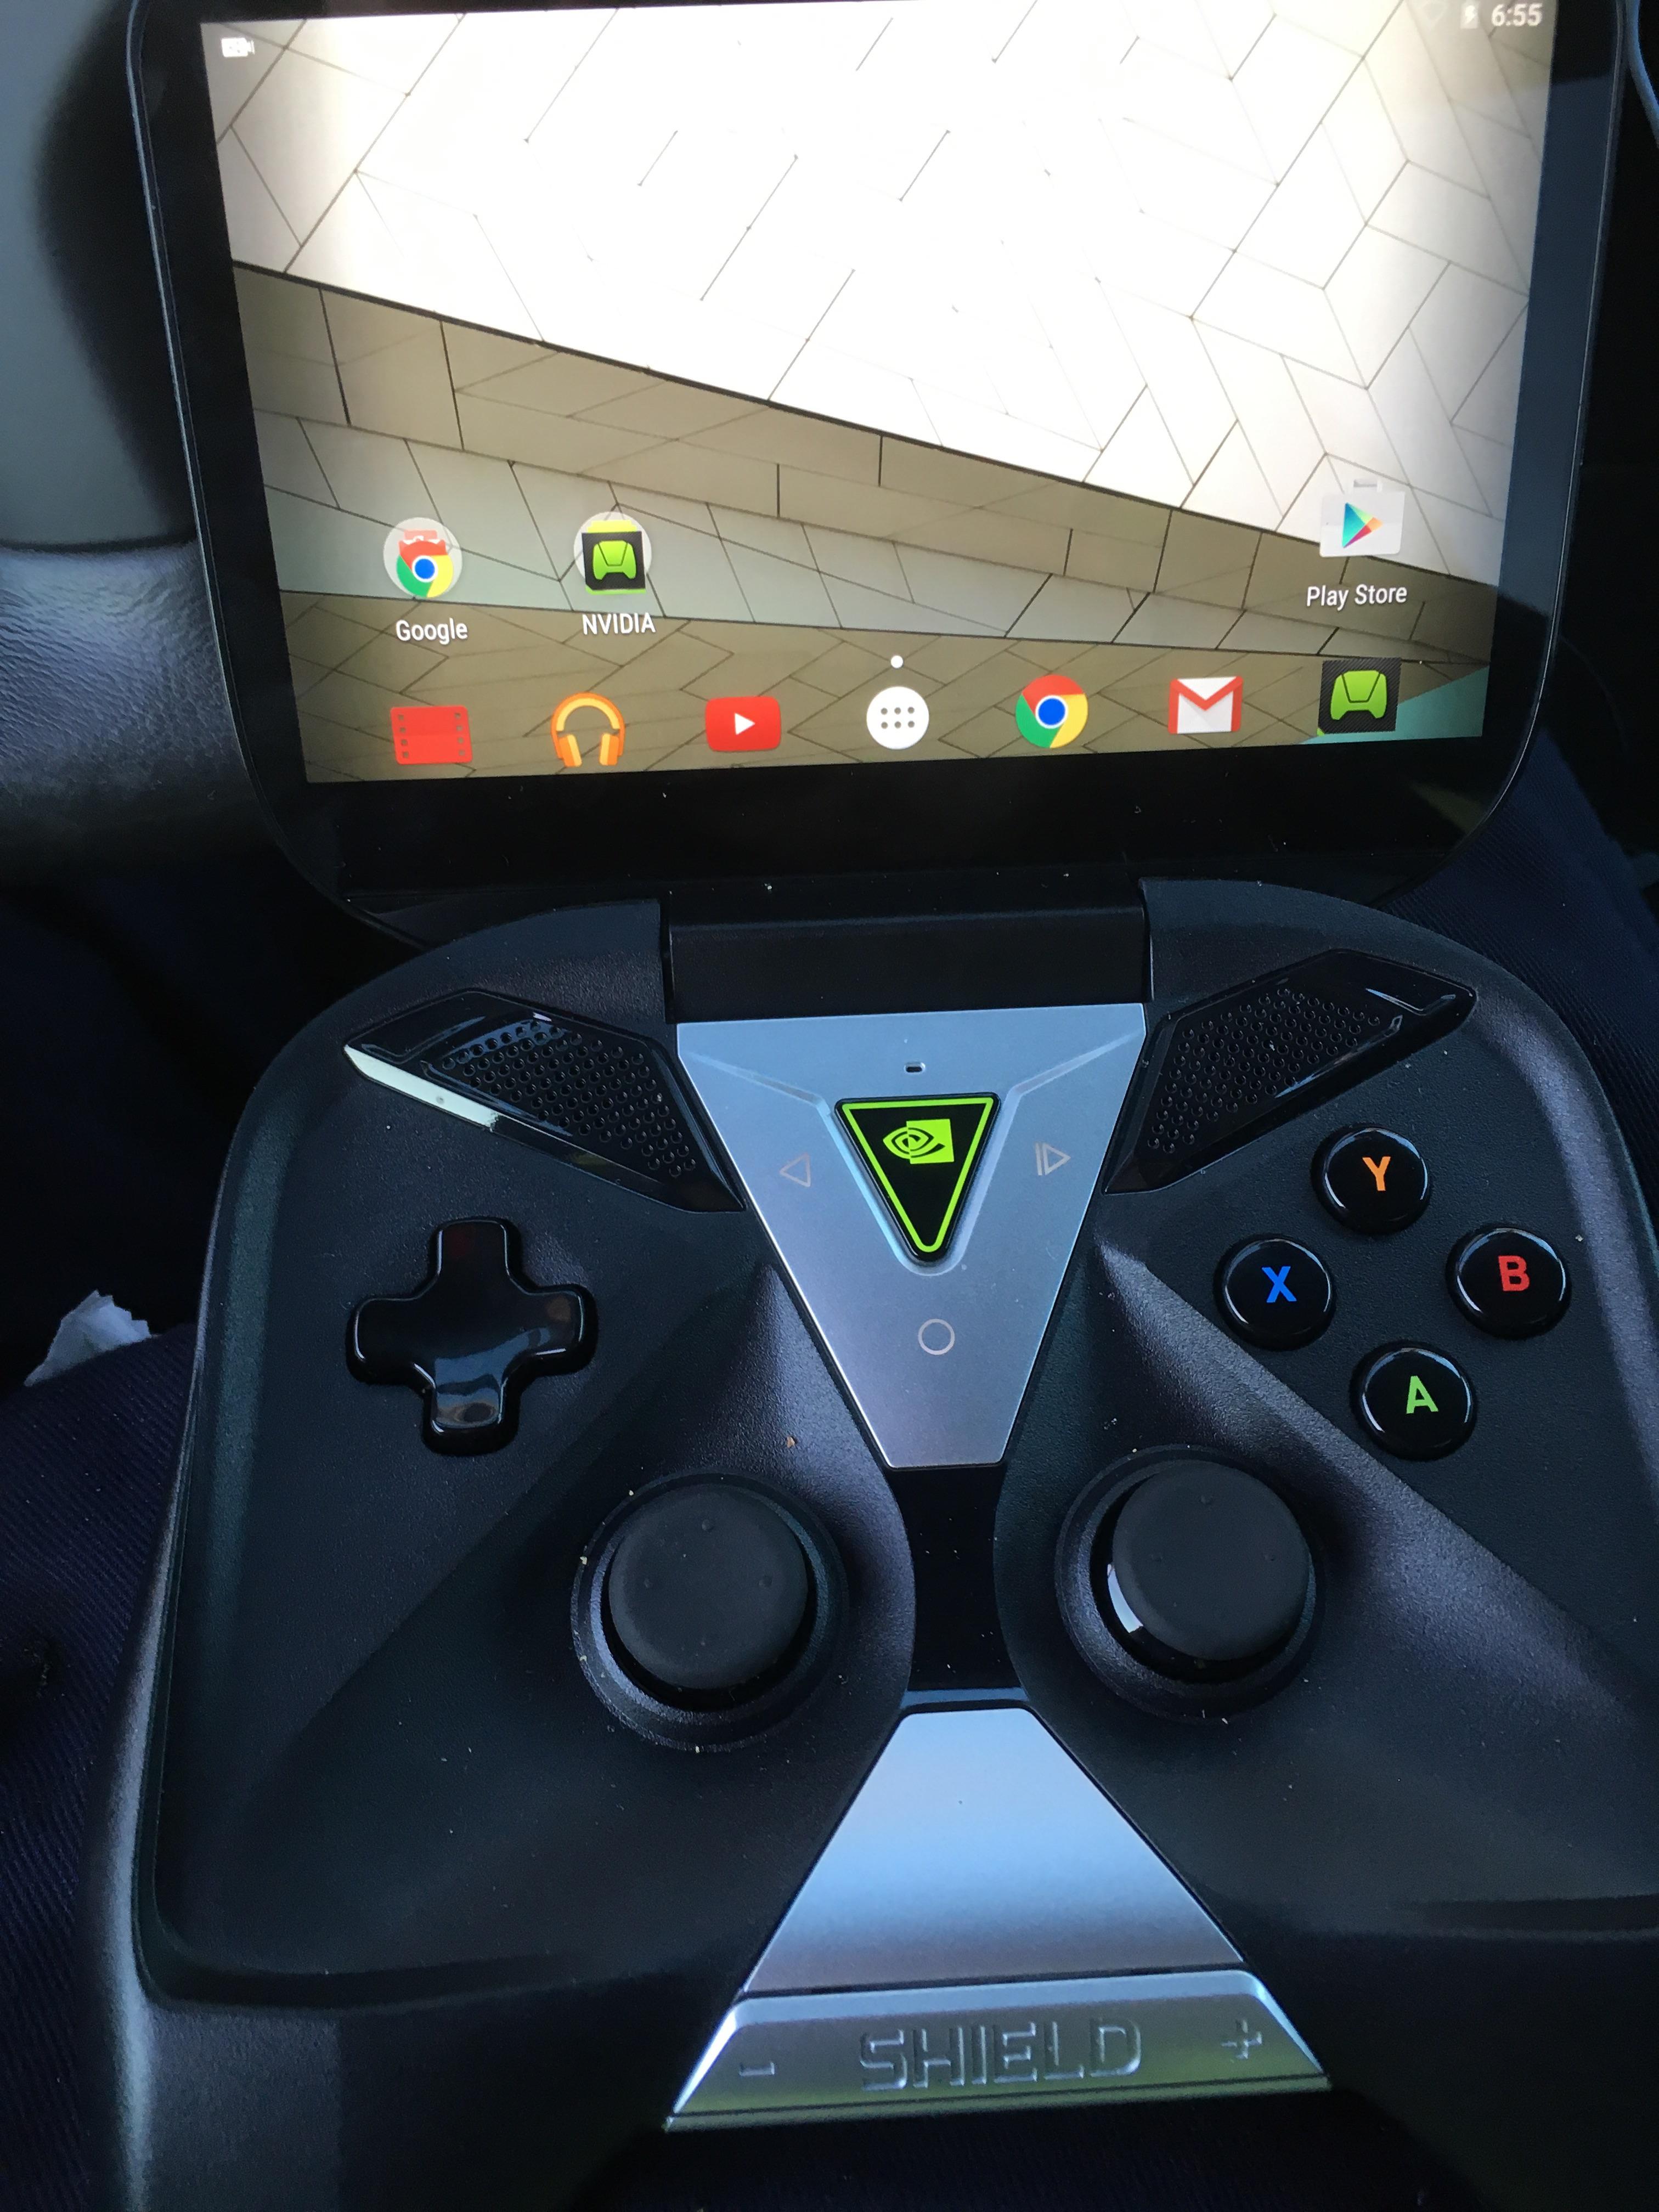 Nvidia Shield Portable 2 Prototype Found in Canadian Pawn Shop